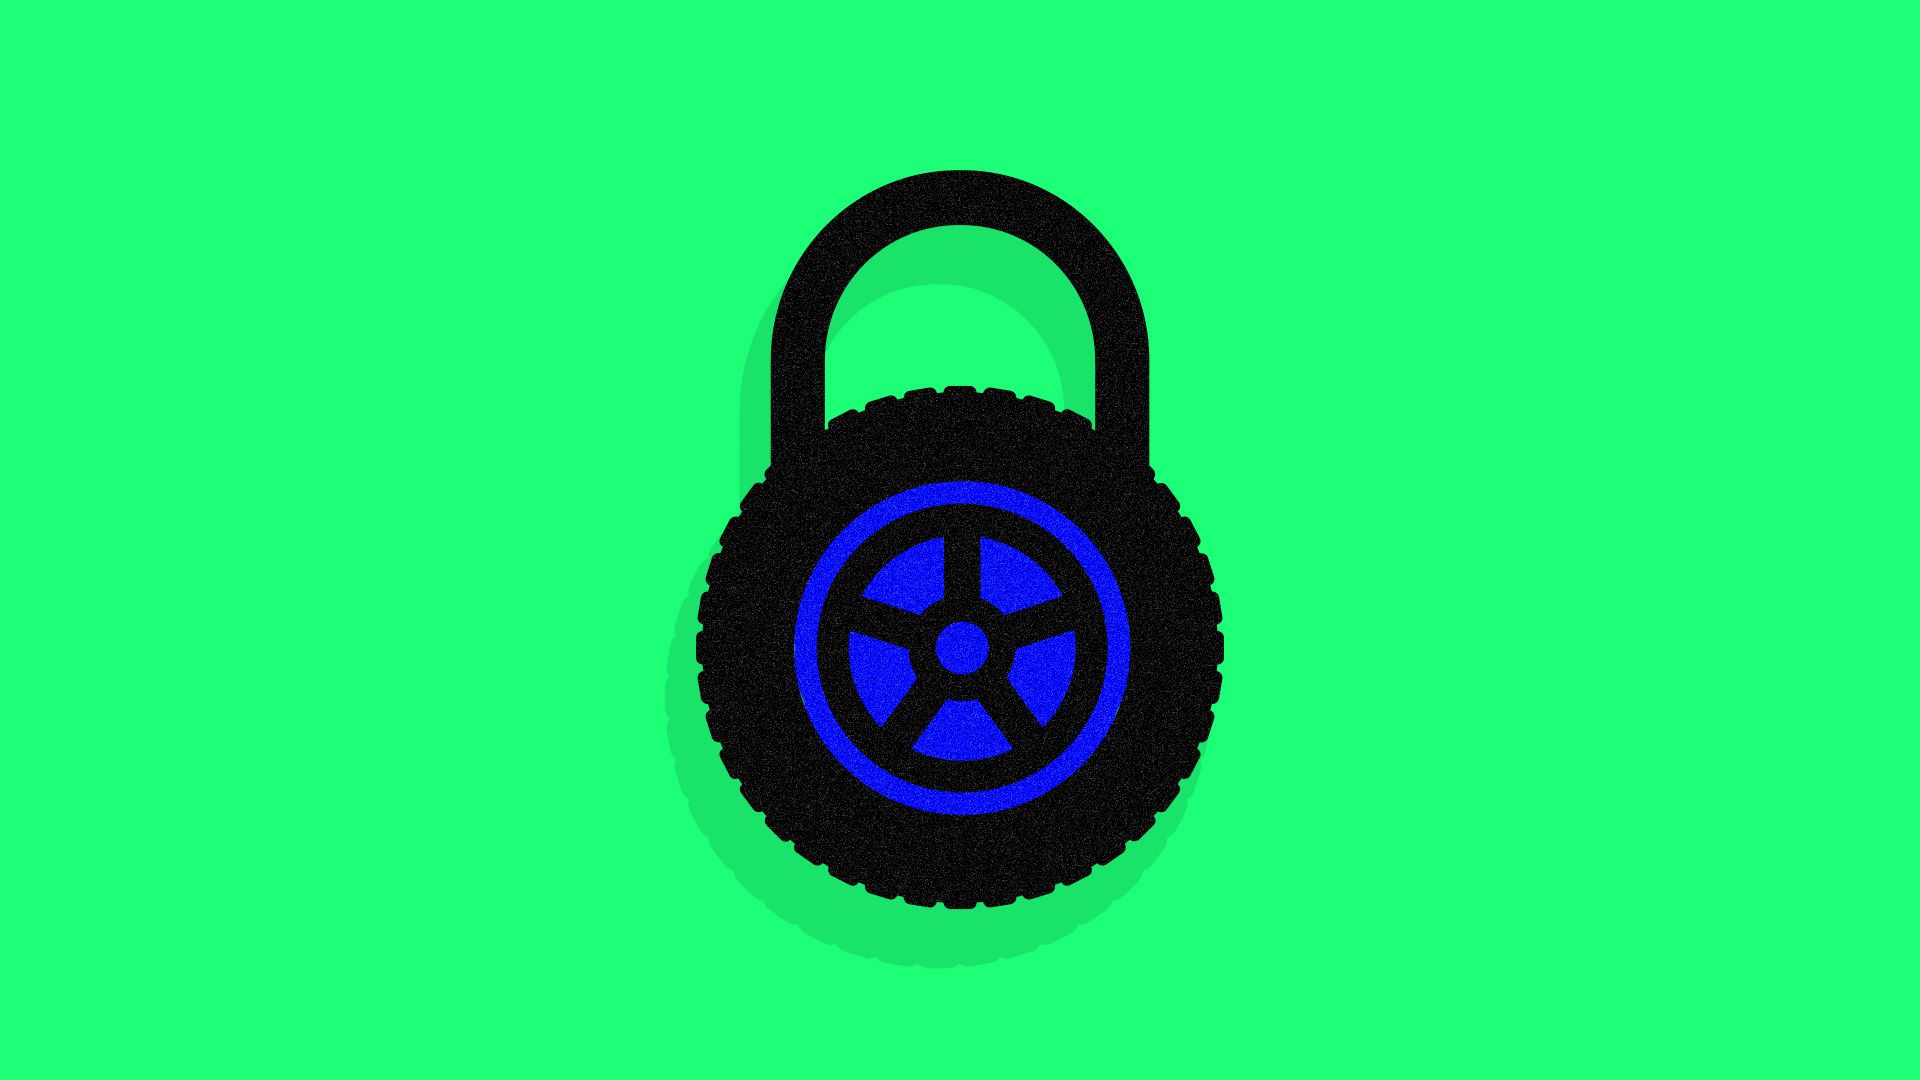 Illustration of a padlock made out of a tire